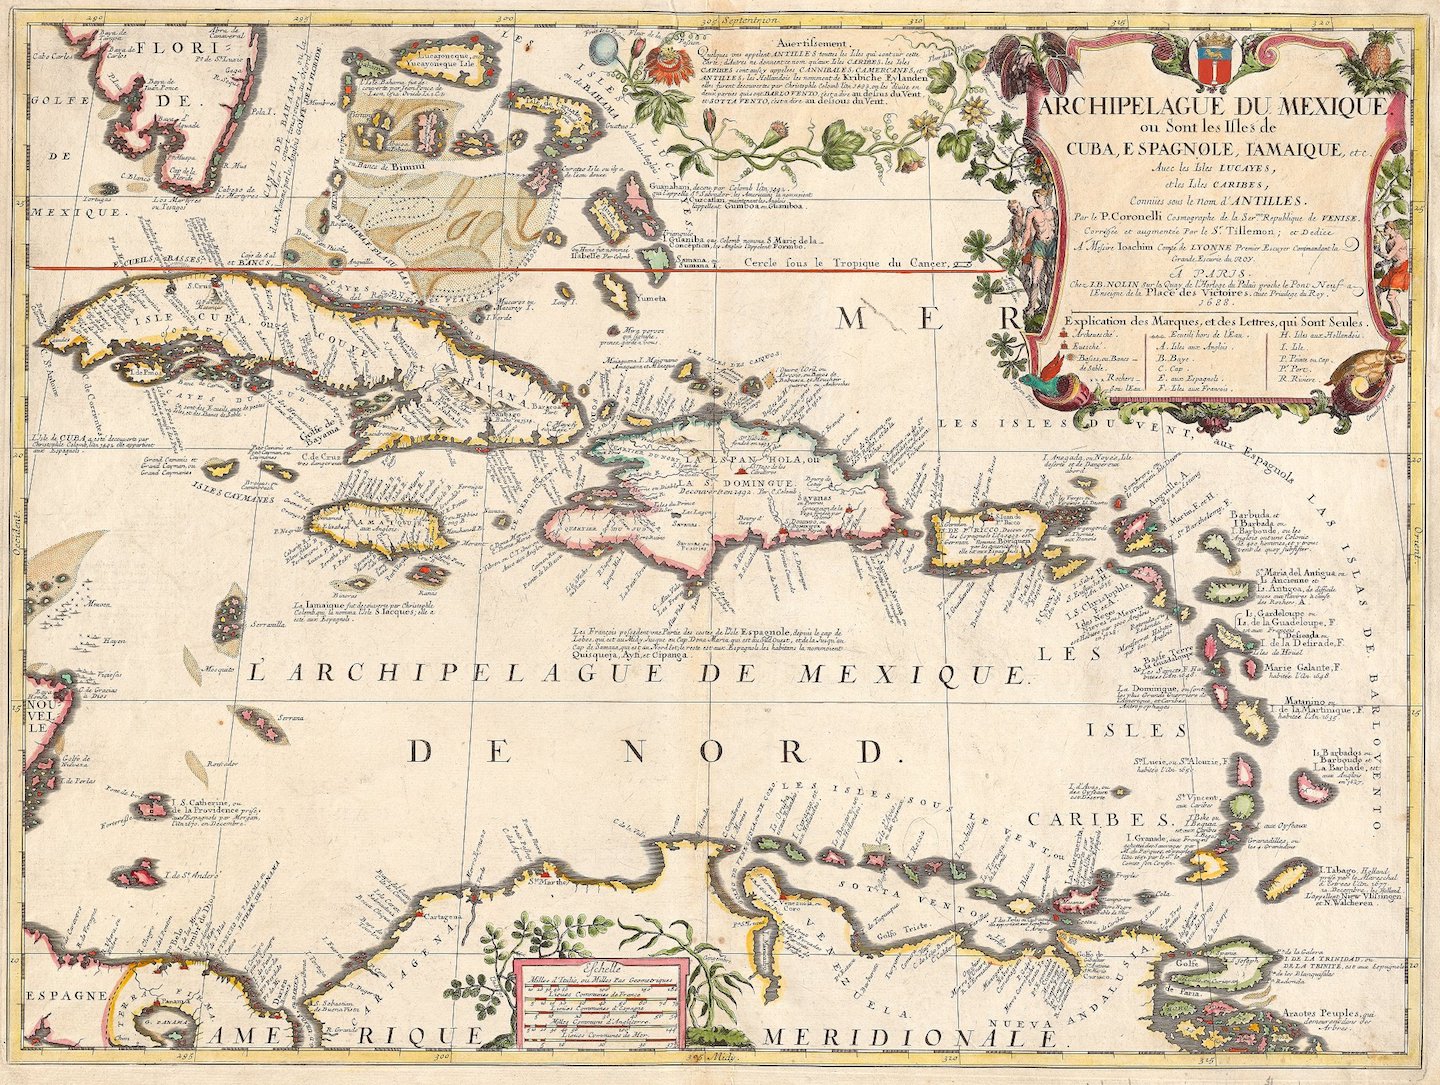 colorful map of the Caribbean islands with a decorative cartouche